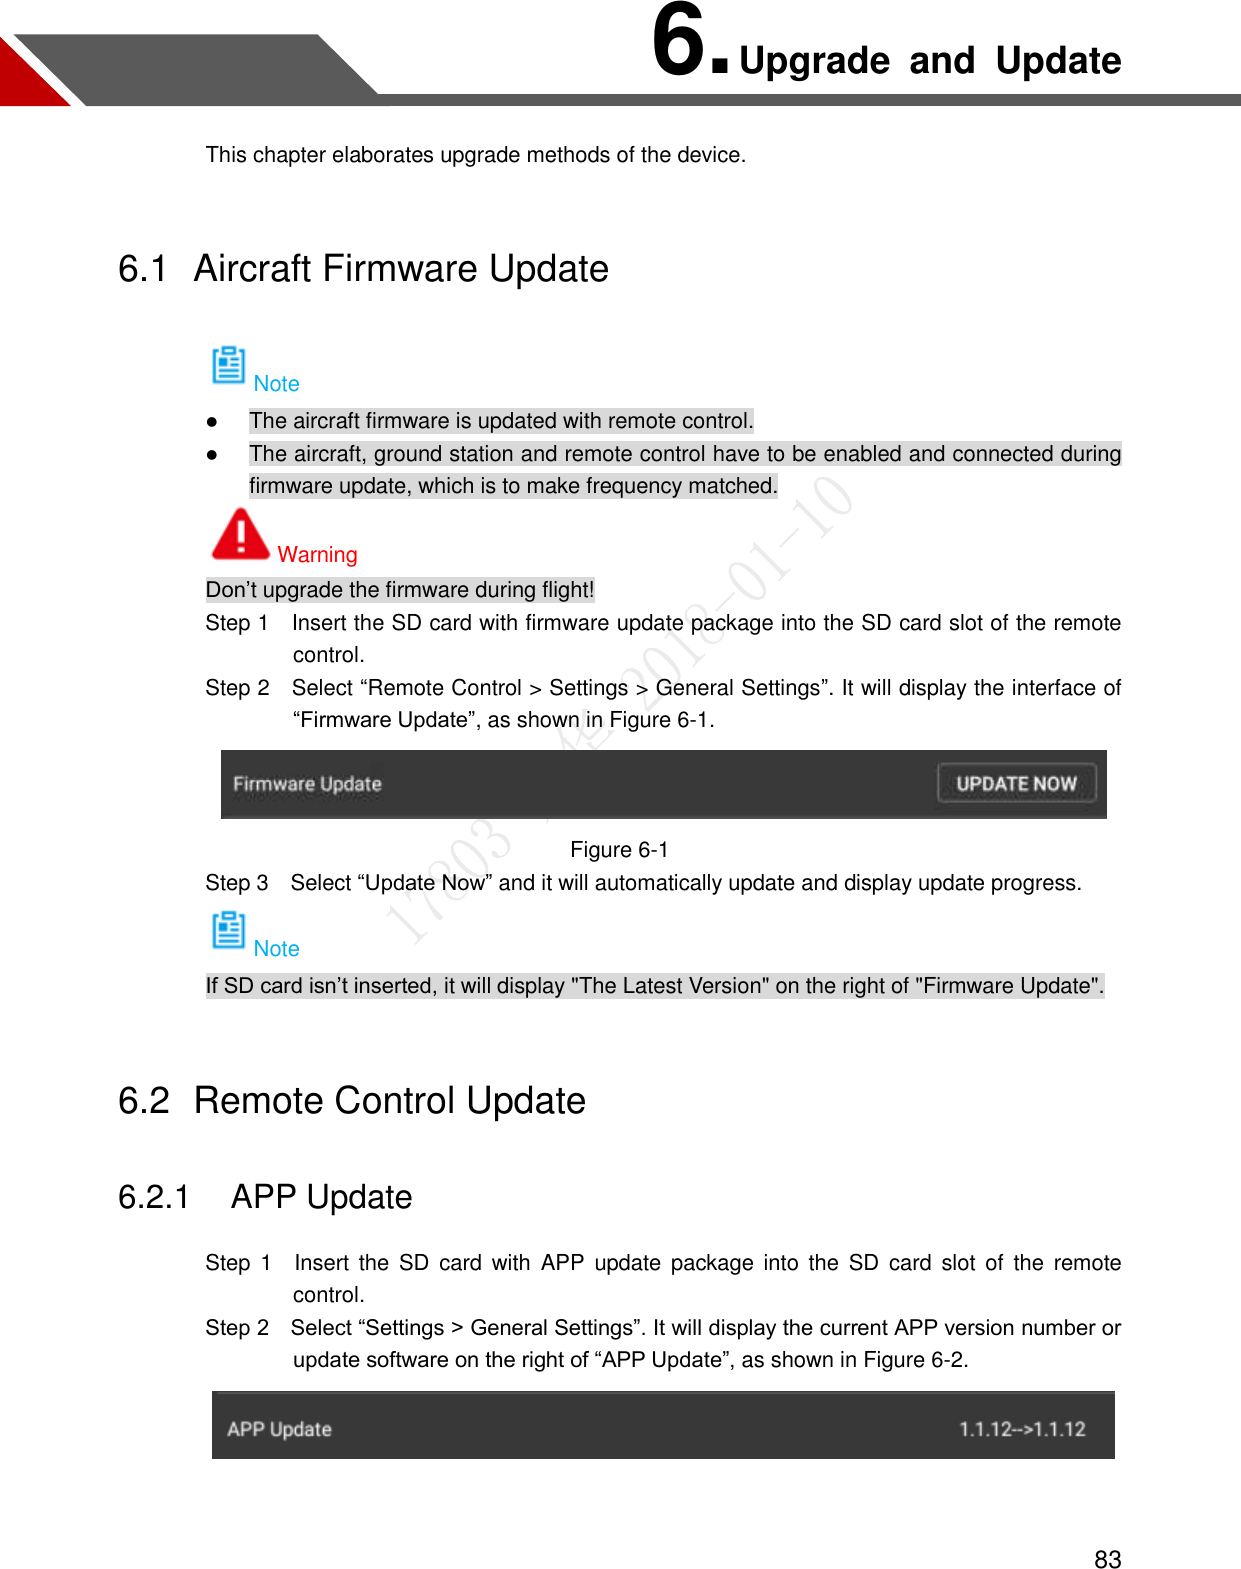  83 6. Upgrade  and  Update This chapter elaborates upgrade methods of the device. 6.1  Aircraft Firmware Update Note  The aircraft firmware is updated with remote control.  The aircraft, ground station and remote control have to be enabled and connected during firmware update, which is to make frequency matched. Warning Don’t upgrade the firmware during flight!                 Step 1    Insert the SD card with firmware update package into the SD card slot of the remote control.                 Step 2  Select “Remote Control &gt; Settings &gt; General Settings”. It will display the interface of “Firmware Update”, as shown in Figure 6-1.  Figure 6-1                 Step 3    Select “Update Now” and it will automatically update and display update progress. Note If SD card isn’t inserted, it will display &quot;The Latest Version&quot; on the right of &quot;Firmware Update&quot;. 6.2  Remote Control Update 6.2.1 APP Update                 Step  1    Insert  the  SD  card  with  APP  update package into  the  SD  card  slot  of  the  remote control.         Step 2    Select “Settings &gt; General Settings”. It will display the current APP version number or update software on the right of “APP Update”, as shown in Figure 6-2.   